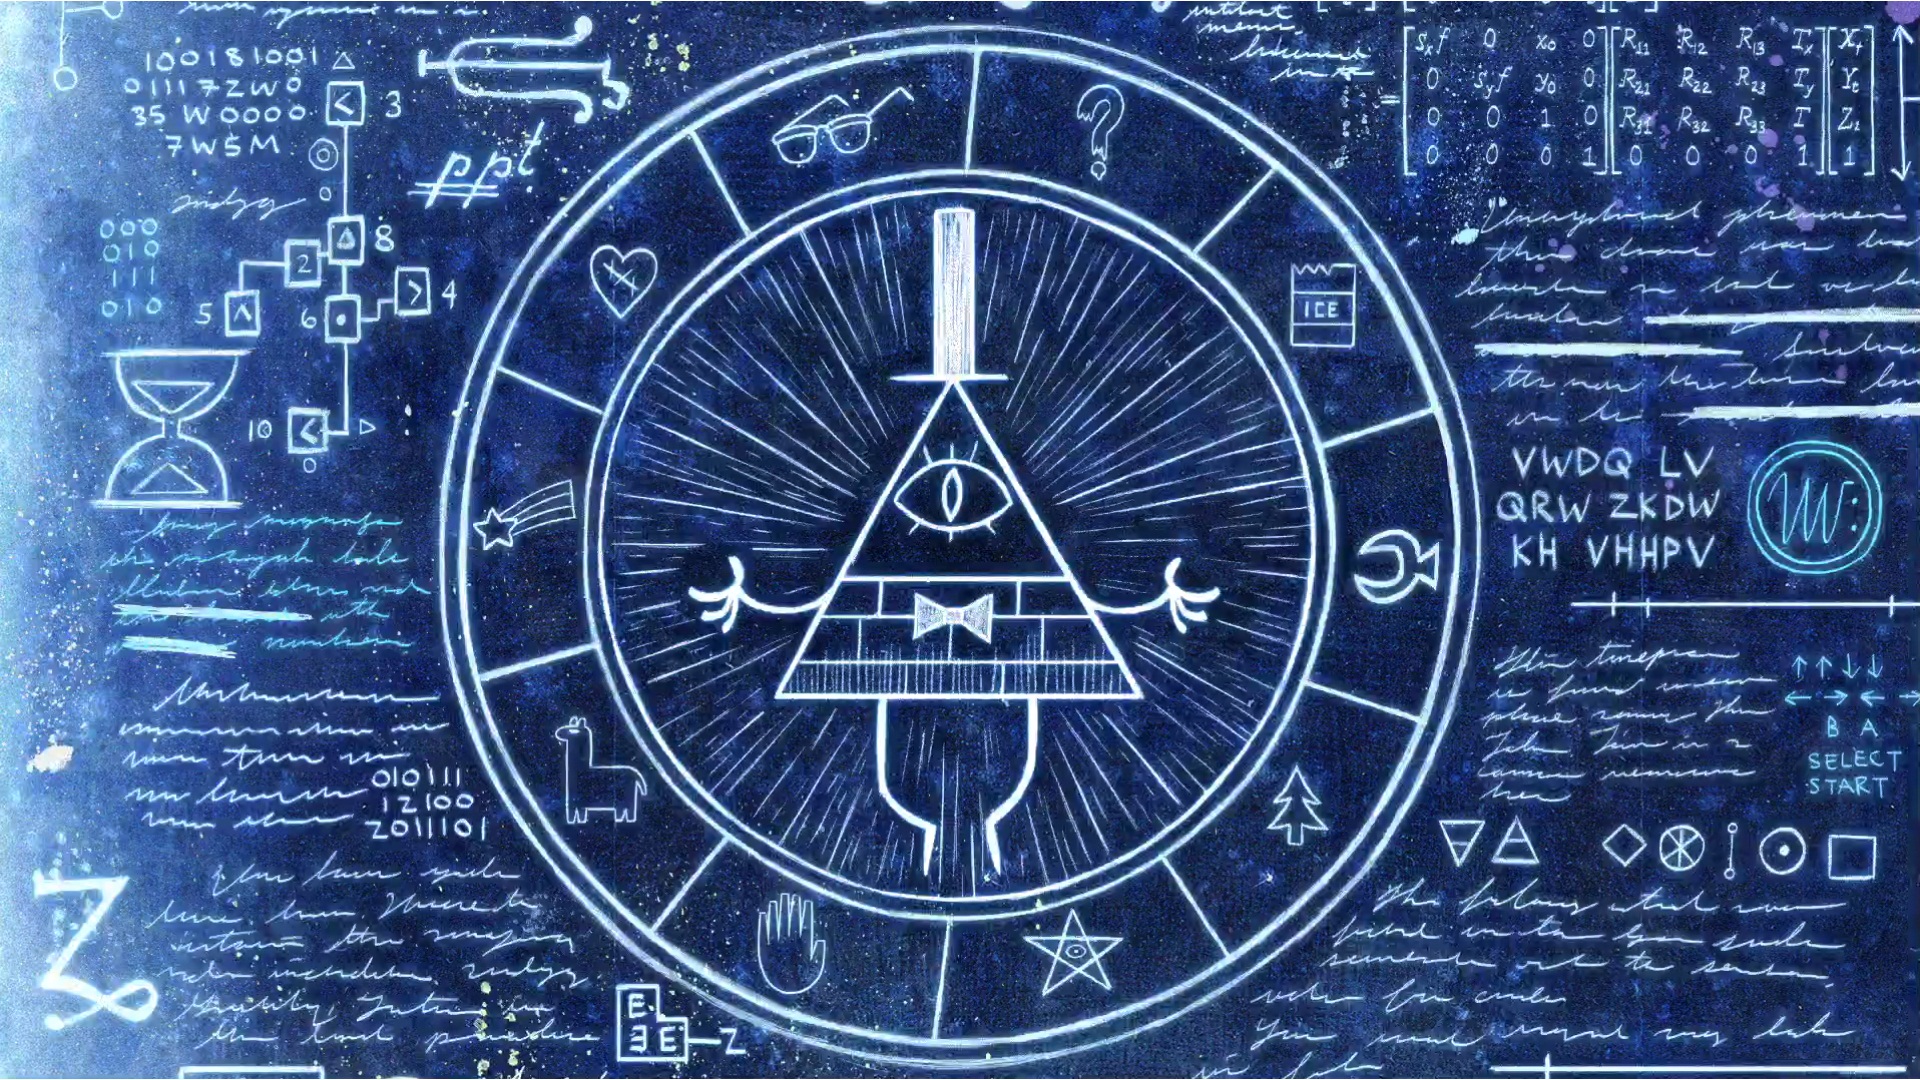 Cipher pictures bill Bill Cipher